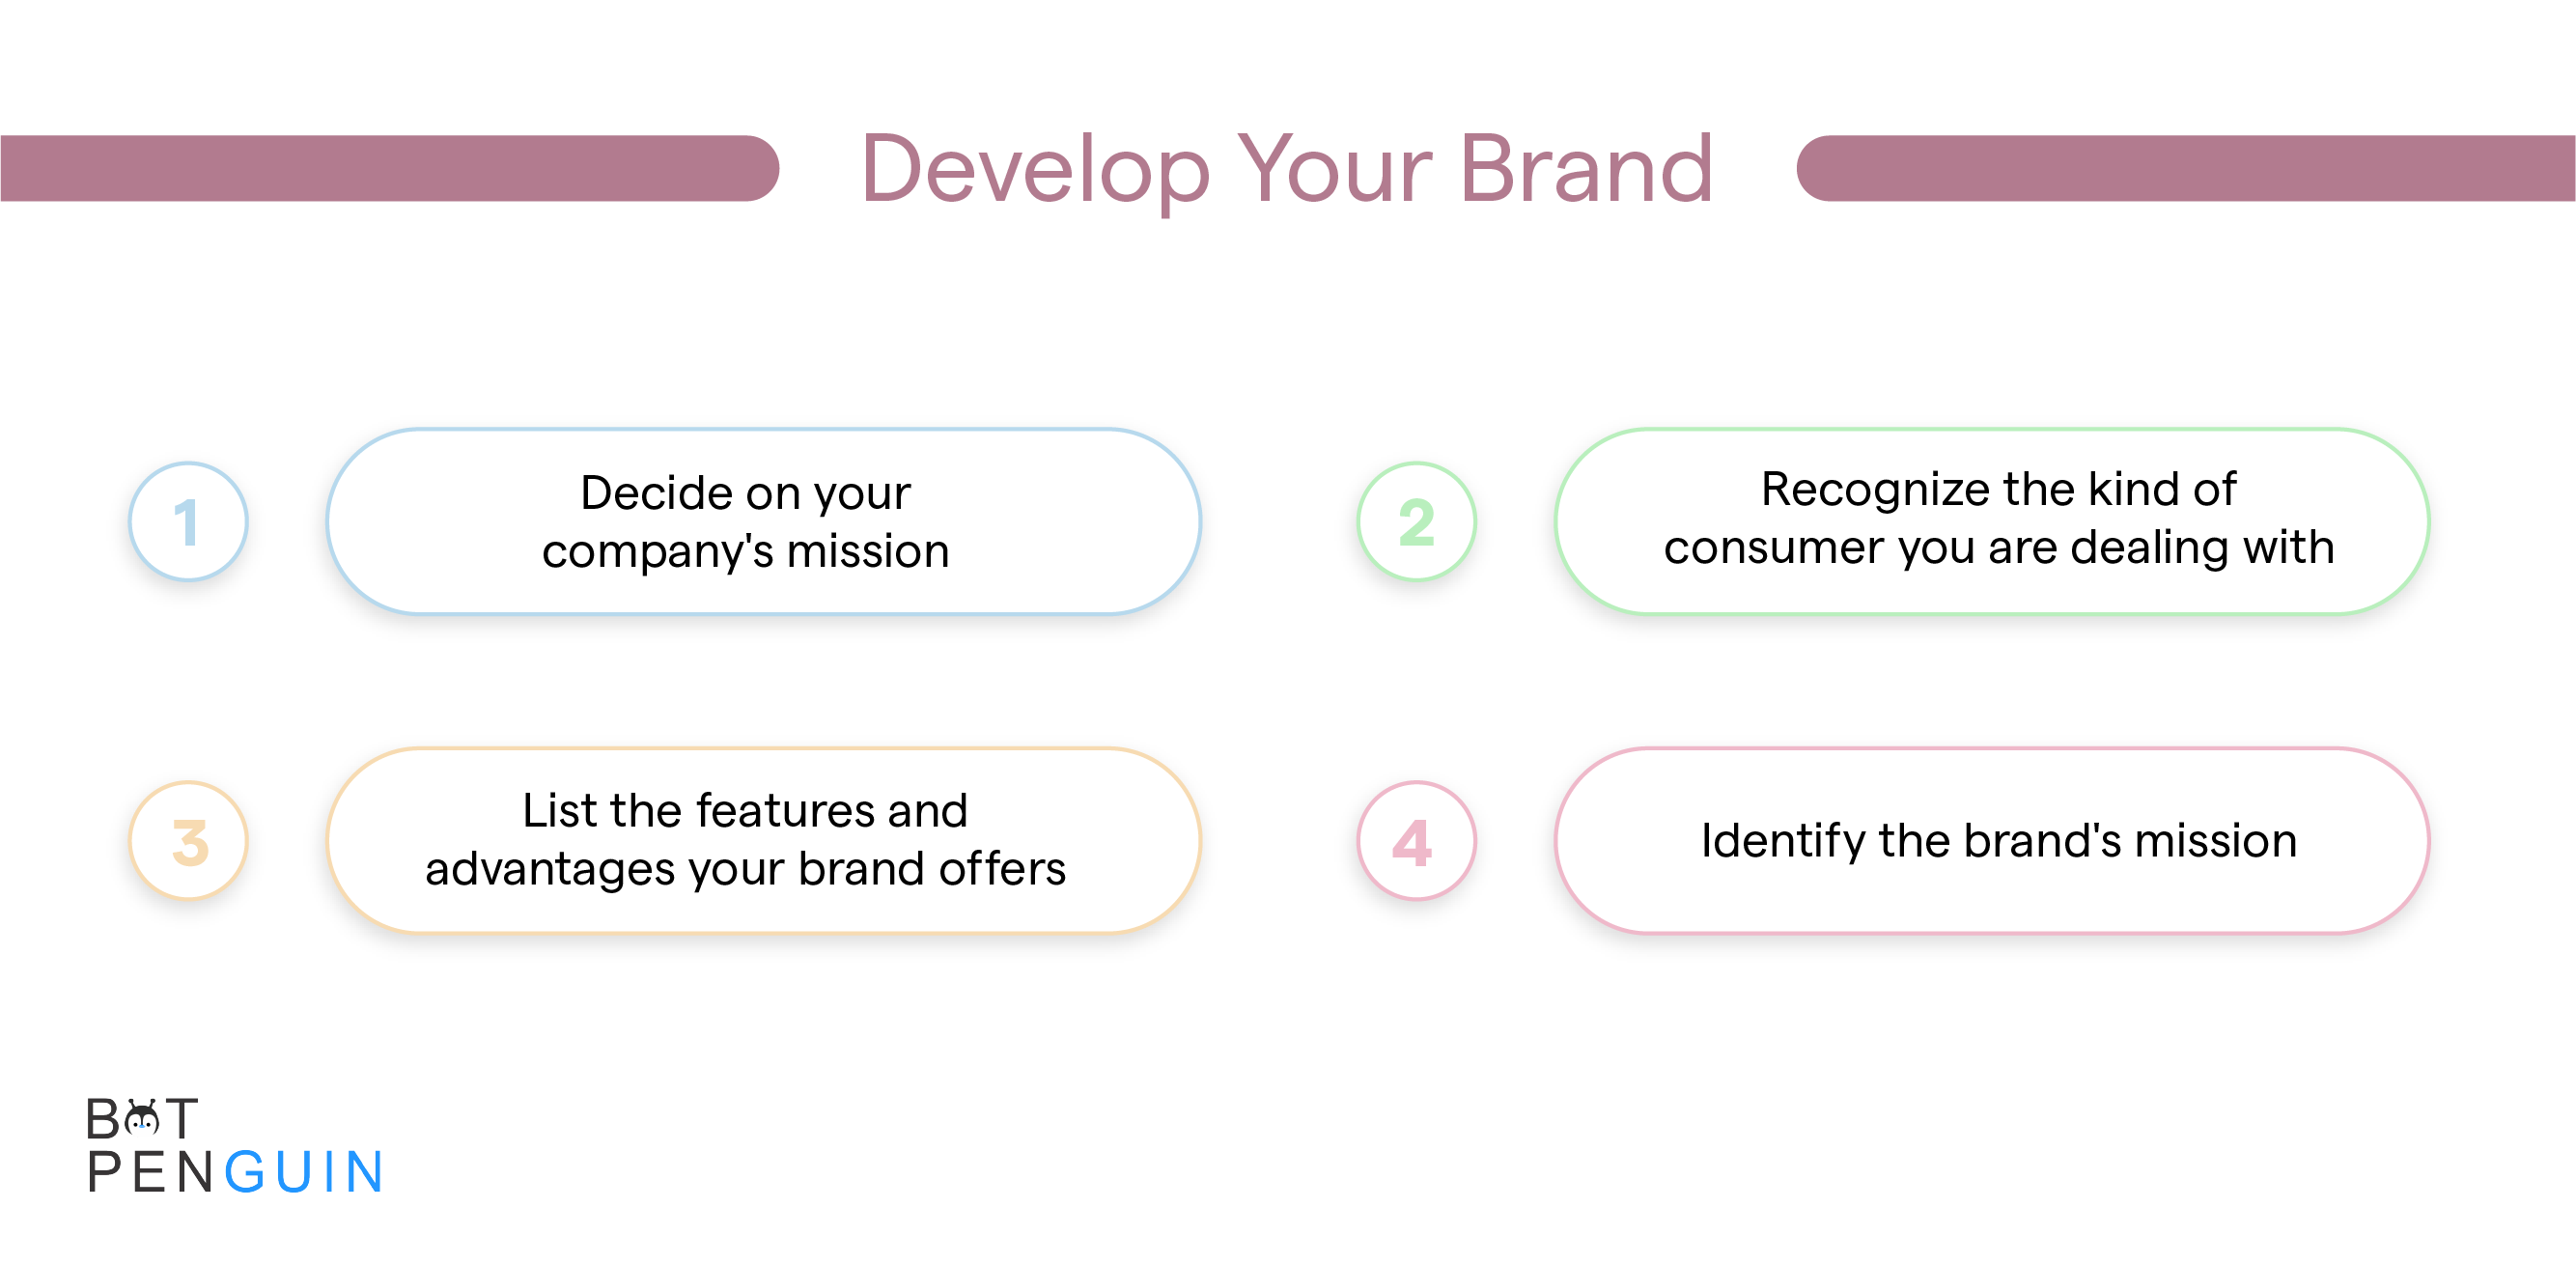 Determine the following aspects of your company to develop your brand